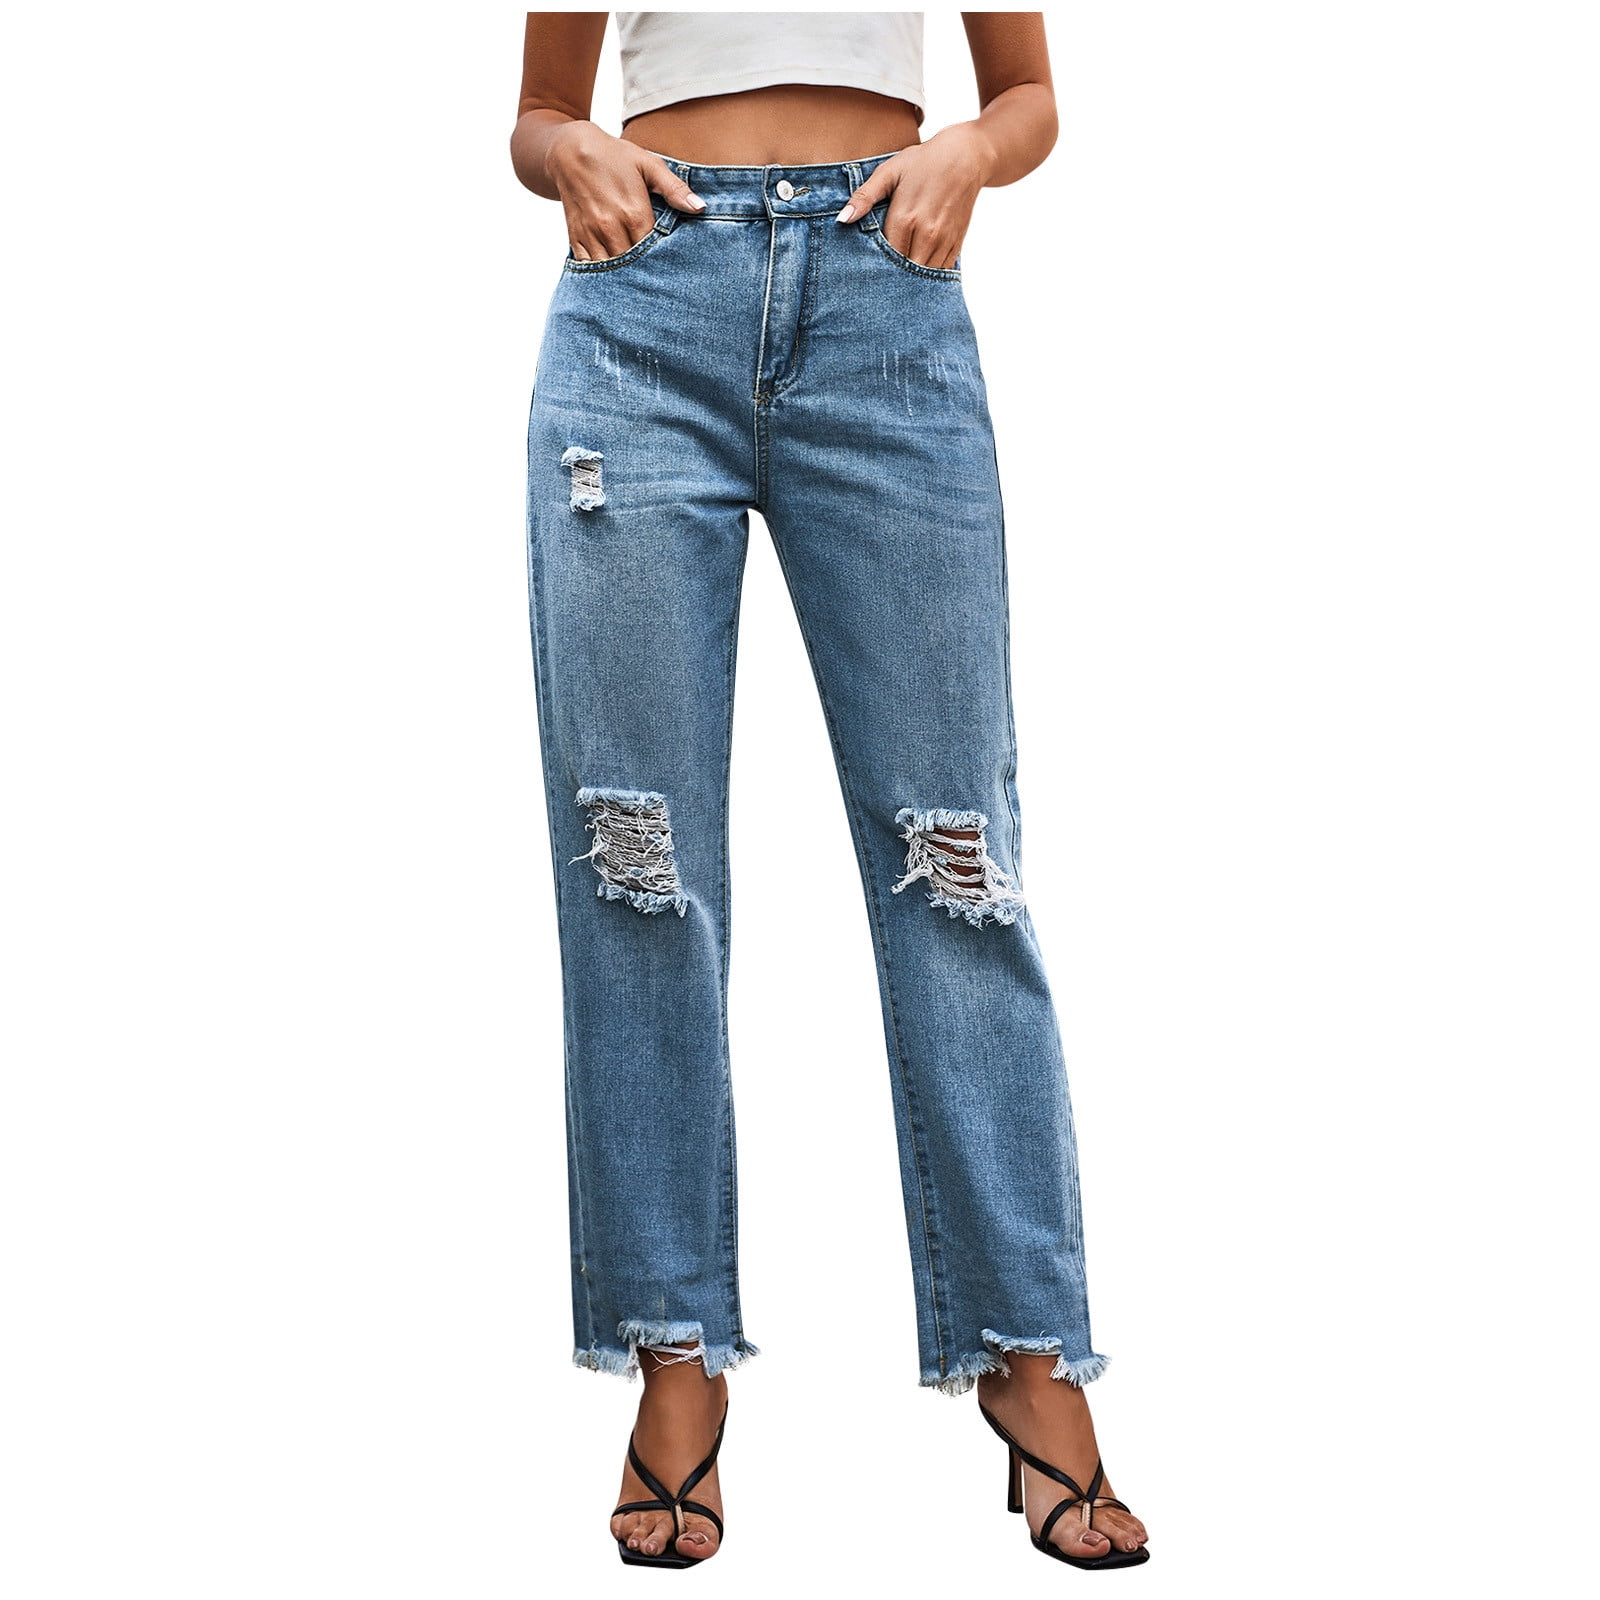 SELONE Jean Shorts Womens High Waisted Jeans for Women With Pockets Shorts  Denim Ripped Summer Slim Fit Stretchy Button Zipper Short Mid Waist Jean